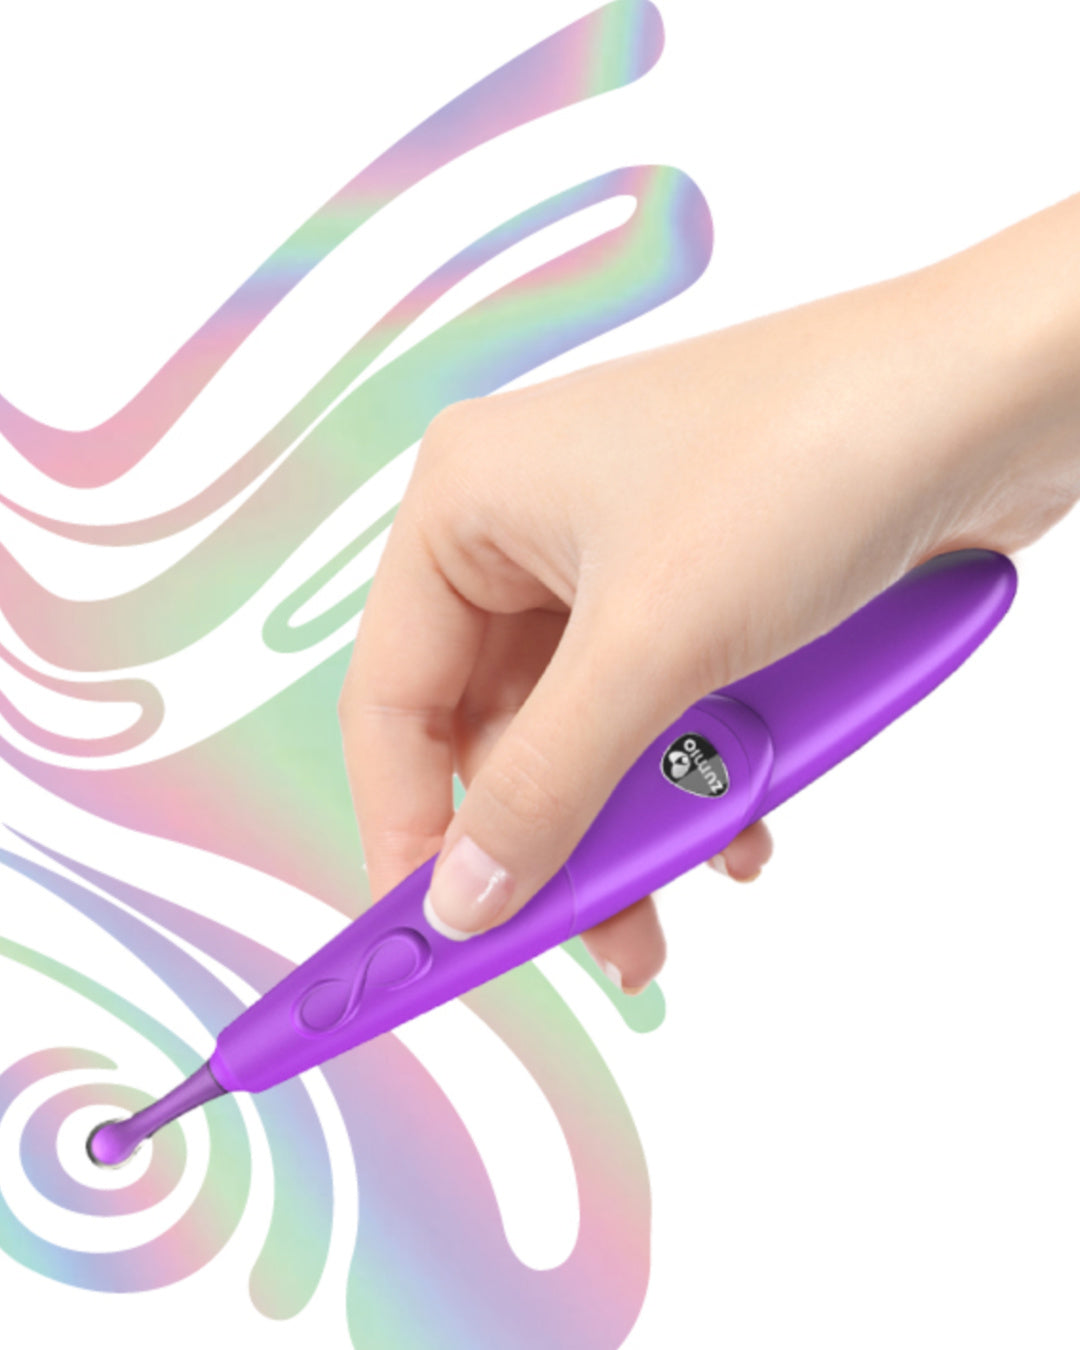 Zumio S - Rechargeable Clitoral Stimulator against a white background with purple swirls held in a woman's hand